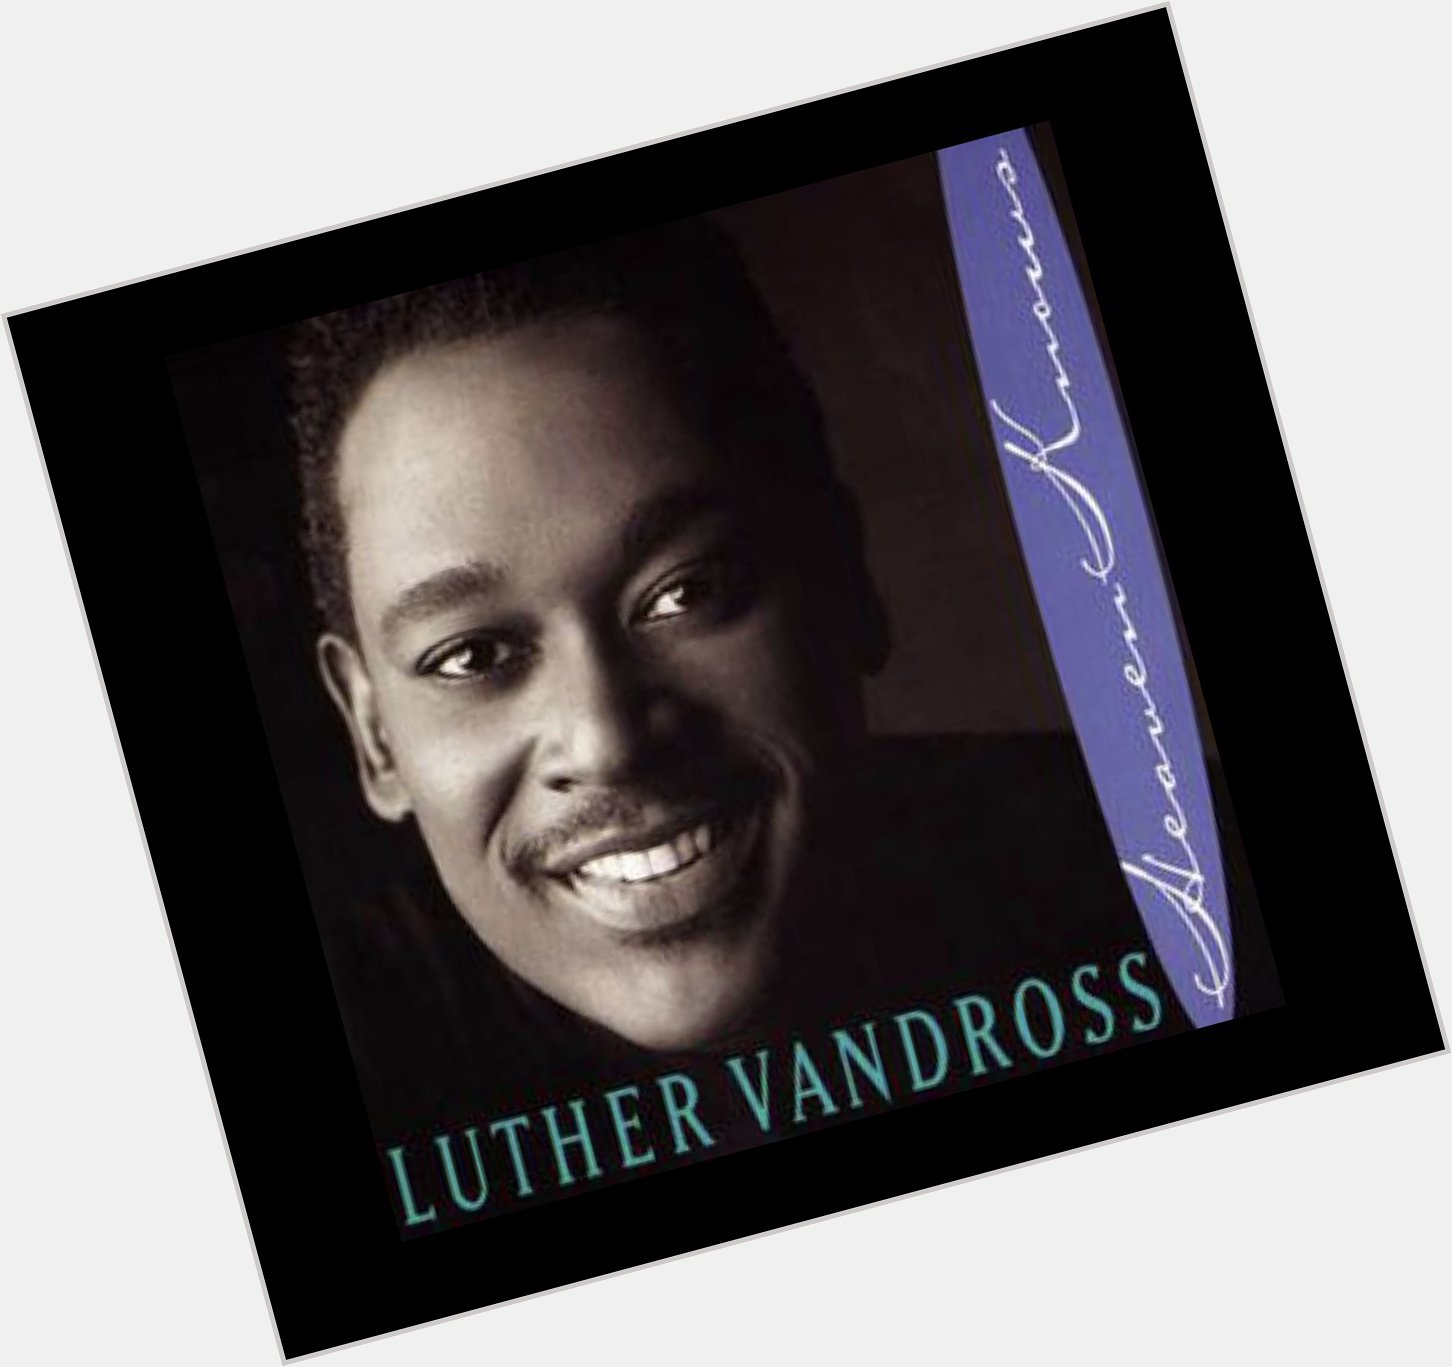 Happy Birthday To The Greatest Luther Vandross 